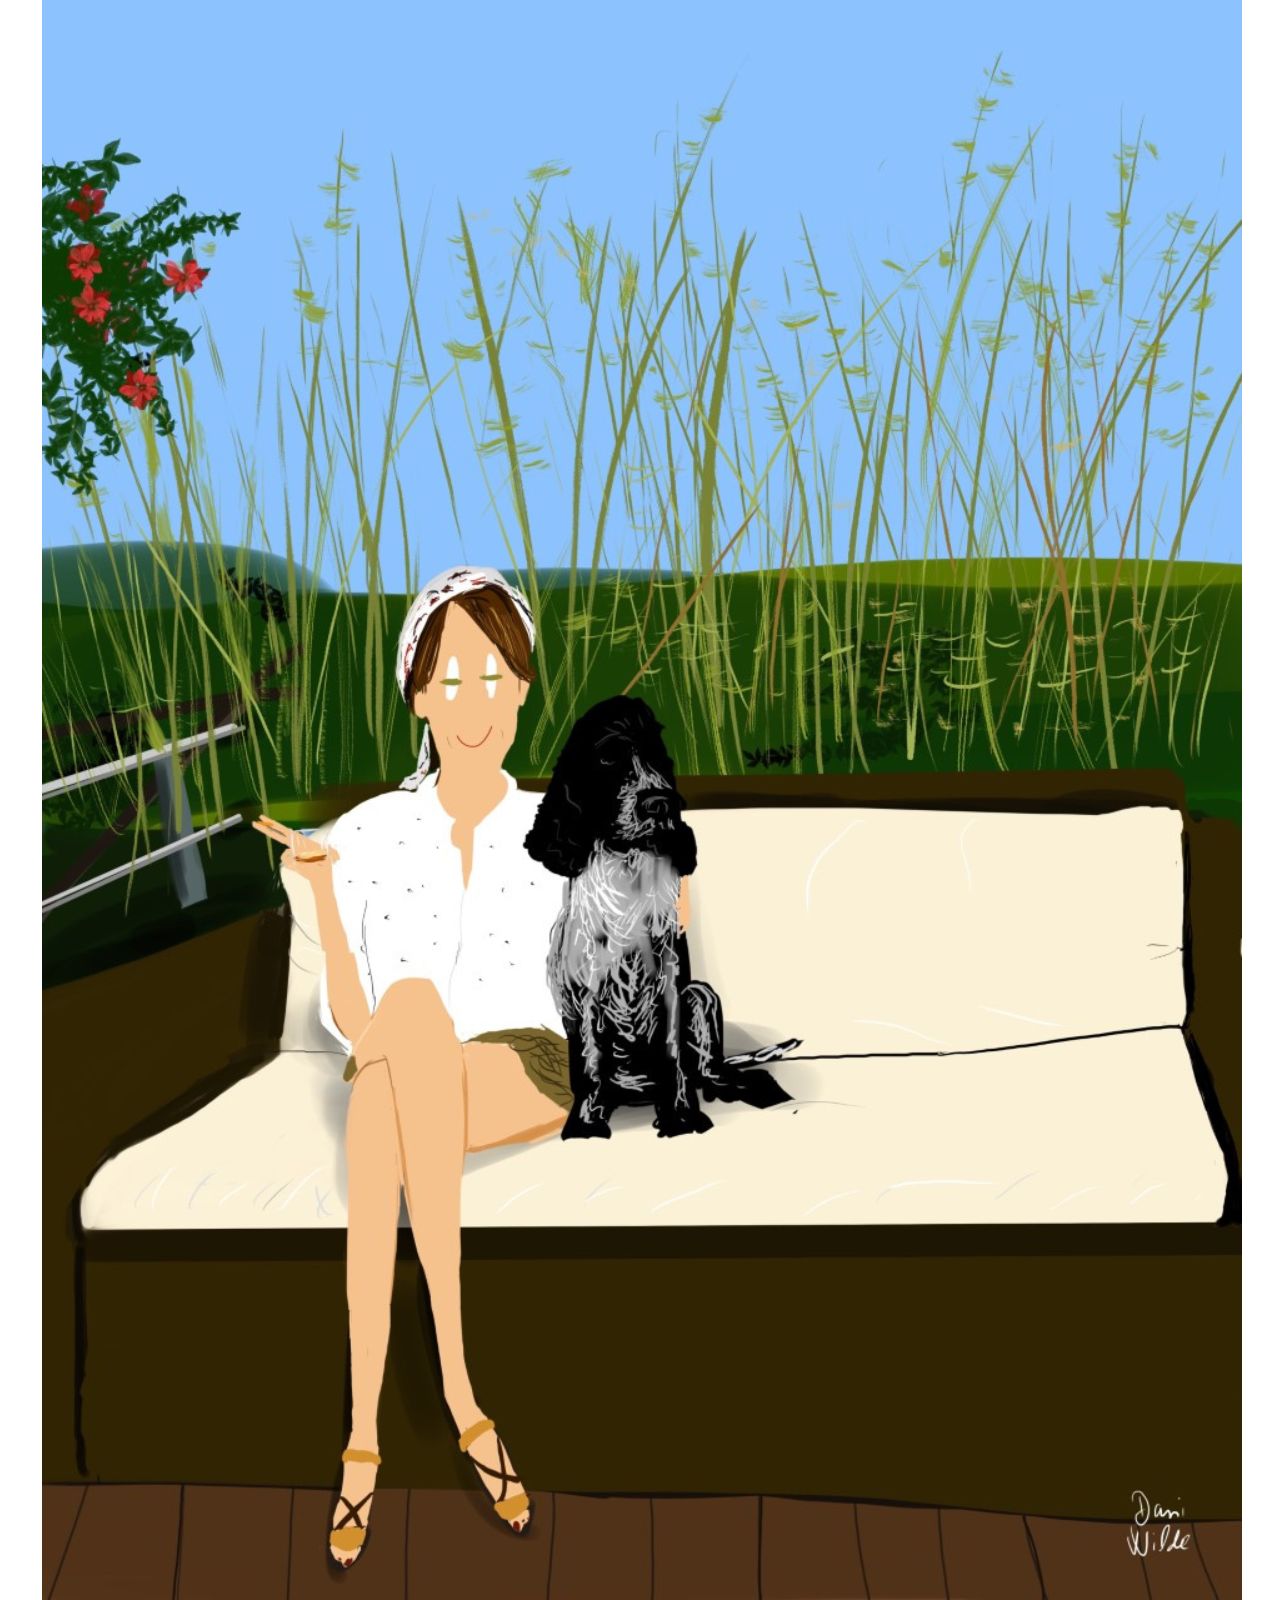 Dani Wilde Illustration of a woman on an outdoor couch wearing a white blouse with a black dog by her side